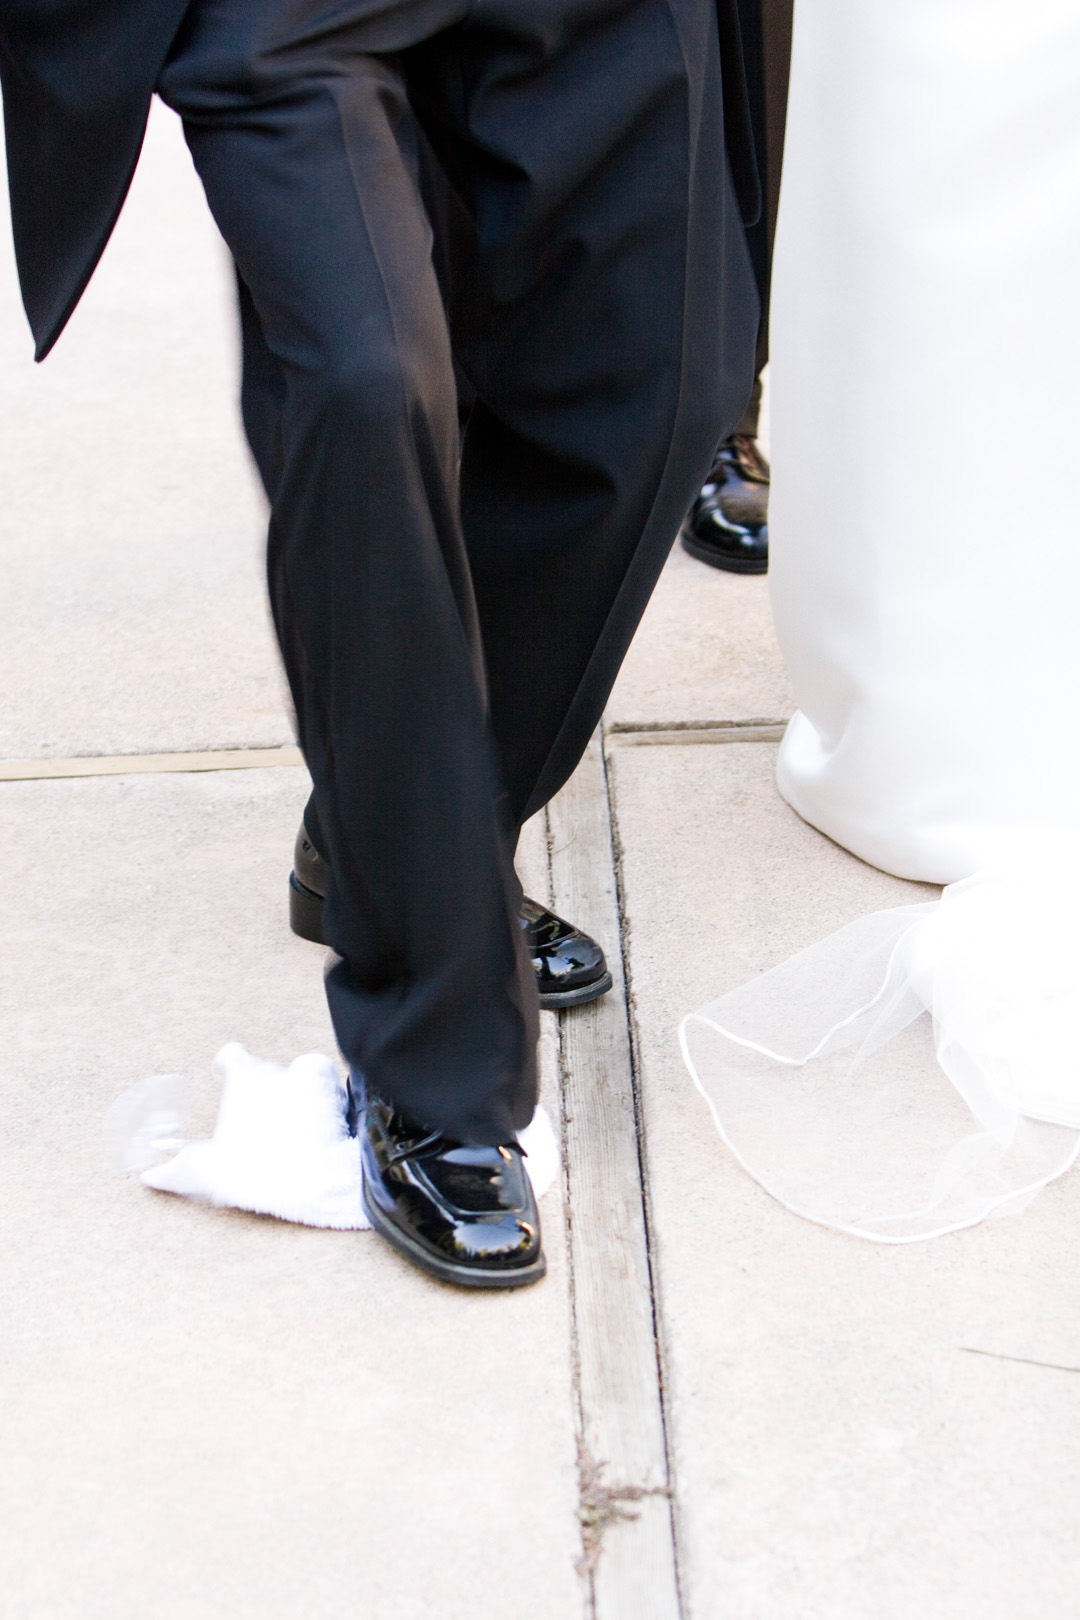 Groom stomps the glass at wedding